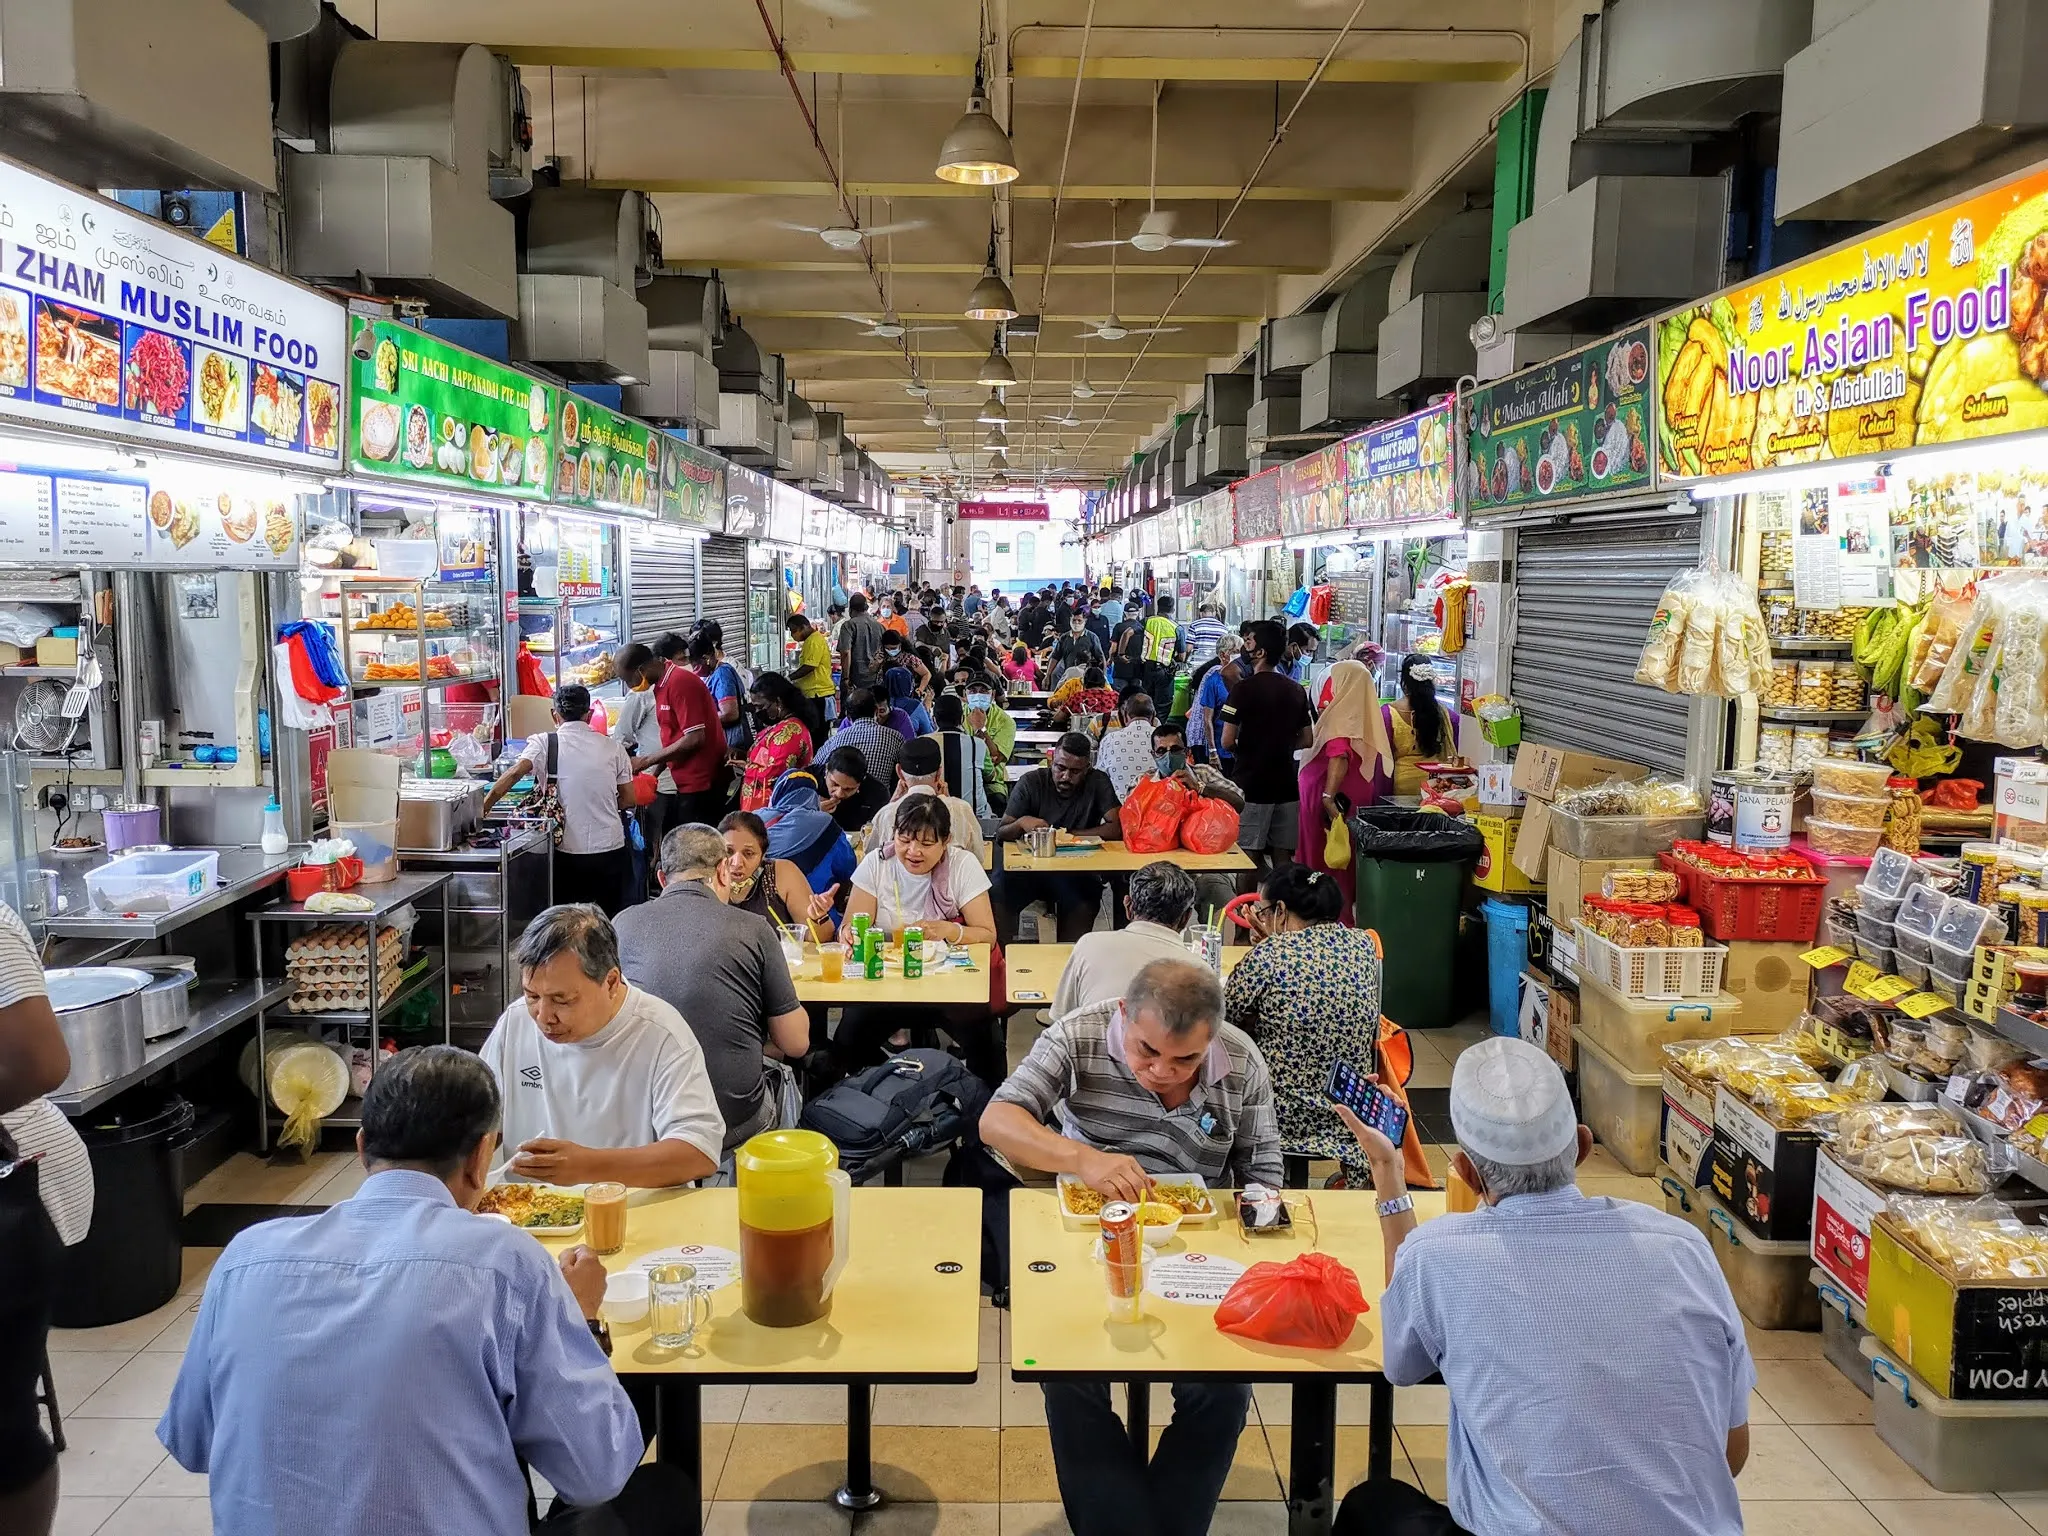 Tekka Centre in Singapore, central_asia | Shoes,Organic Food,Groceries,Clothes,Fruit & Vegetable,Meat,Tea - Country Helper